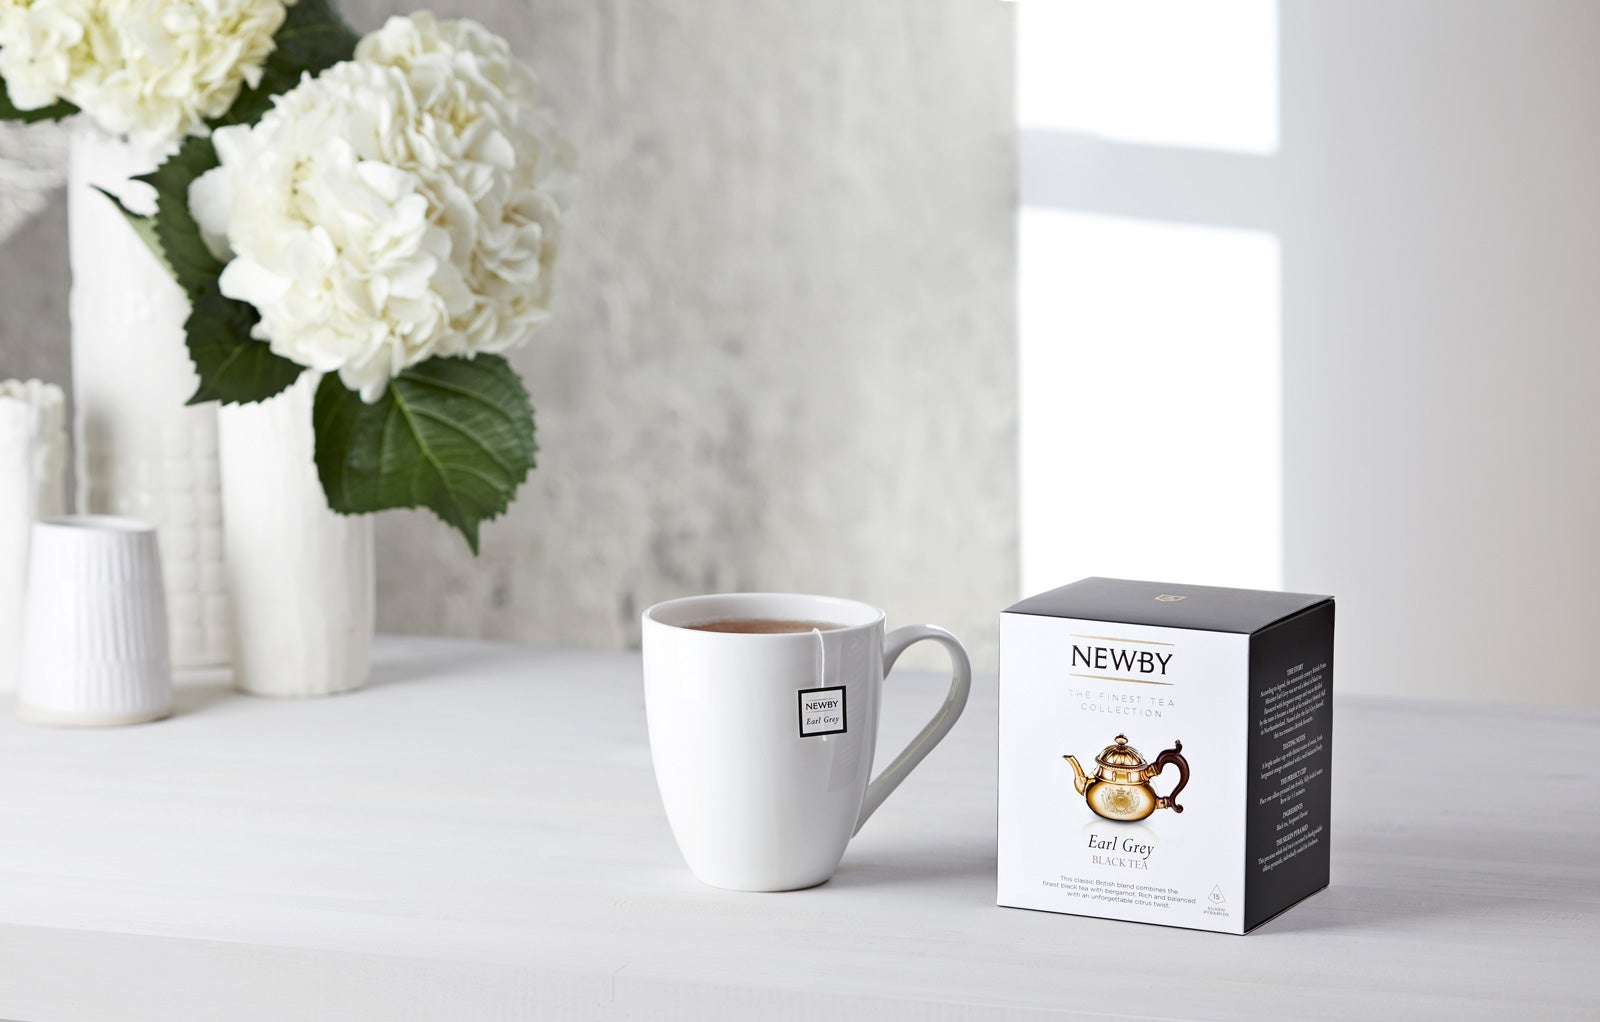 A white cup full of Earl Grey tea sits next to a box of tea, on a white table with white flowers in the background